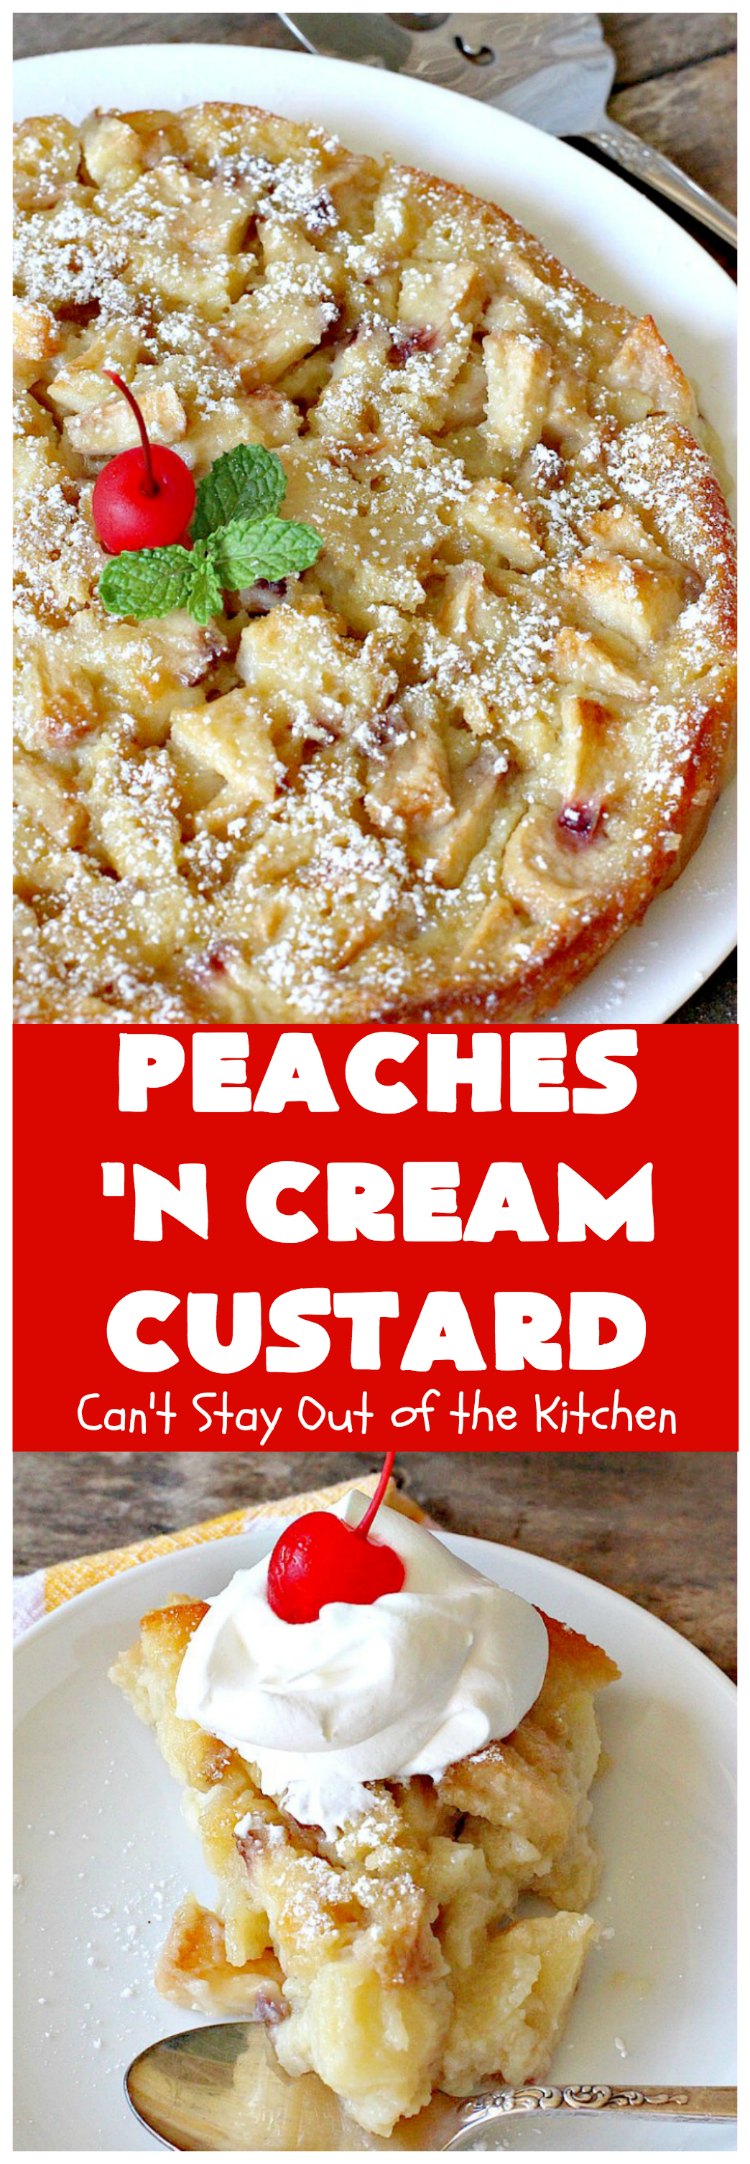 Peaches 'n Cream Custard | Can't Stay Out of the Kitchen